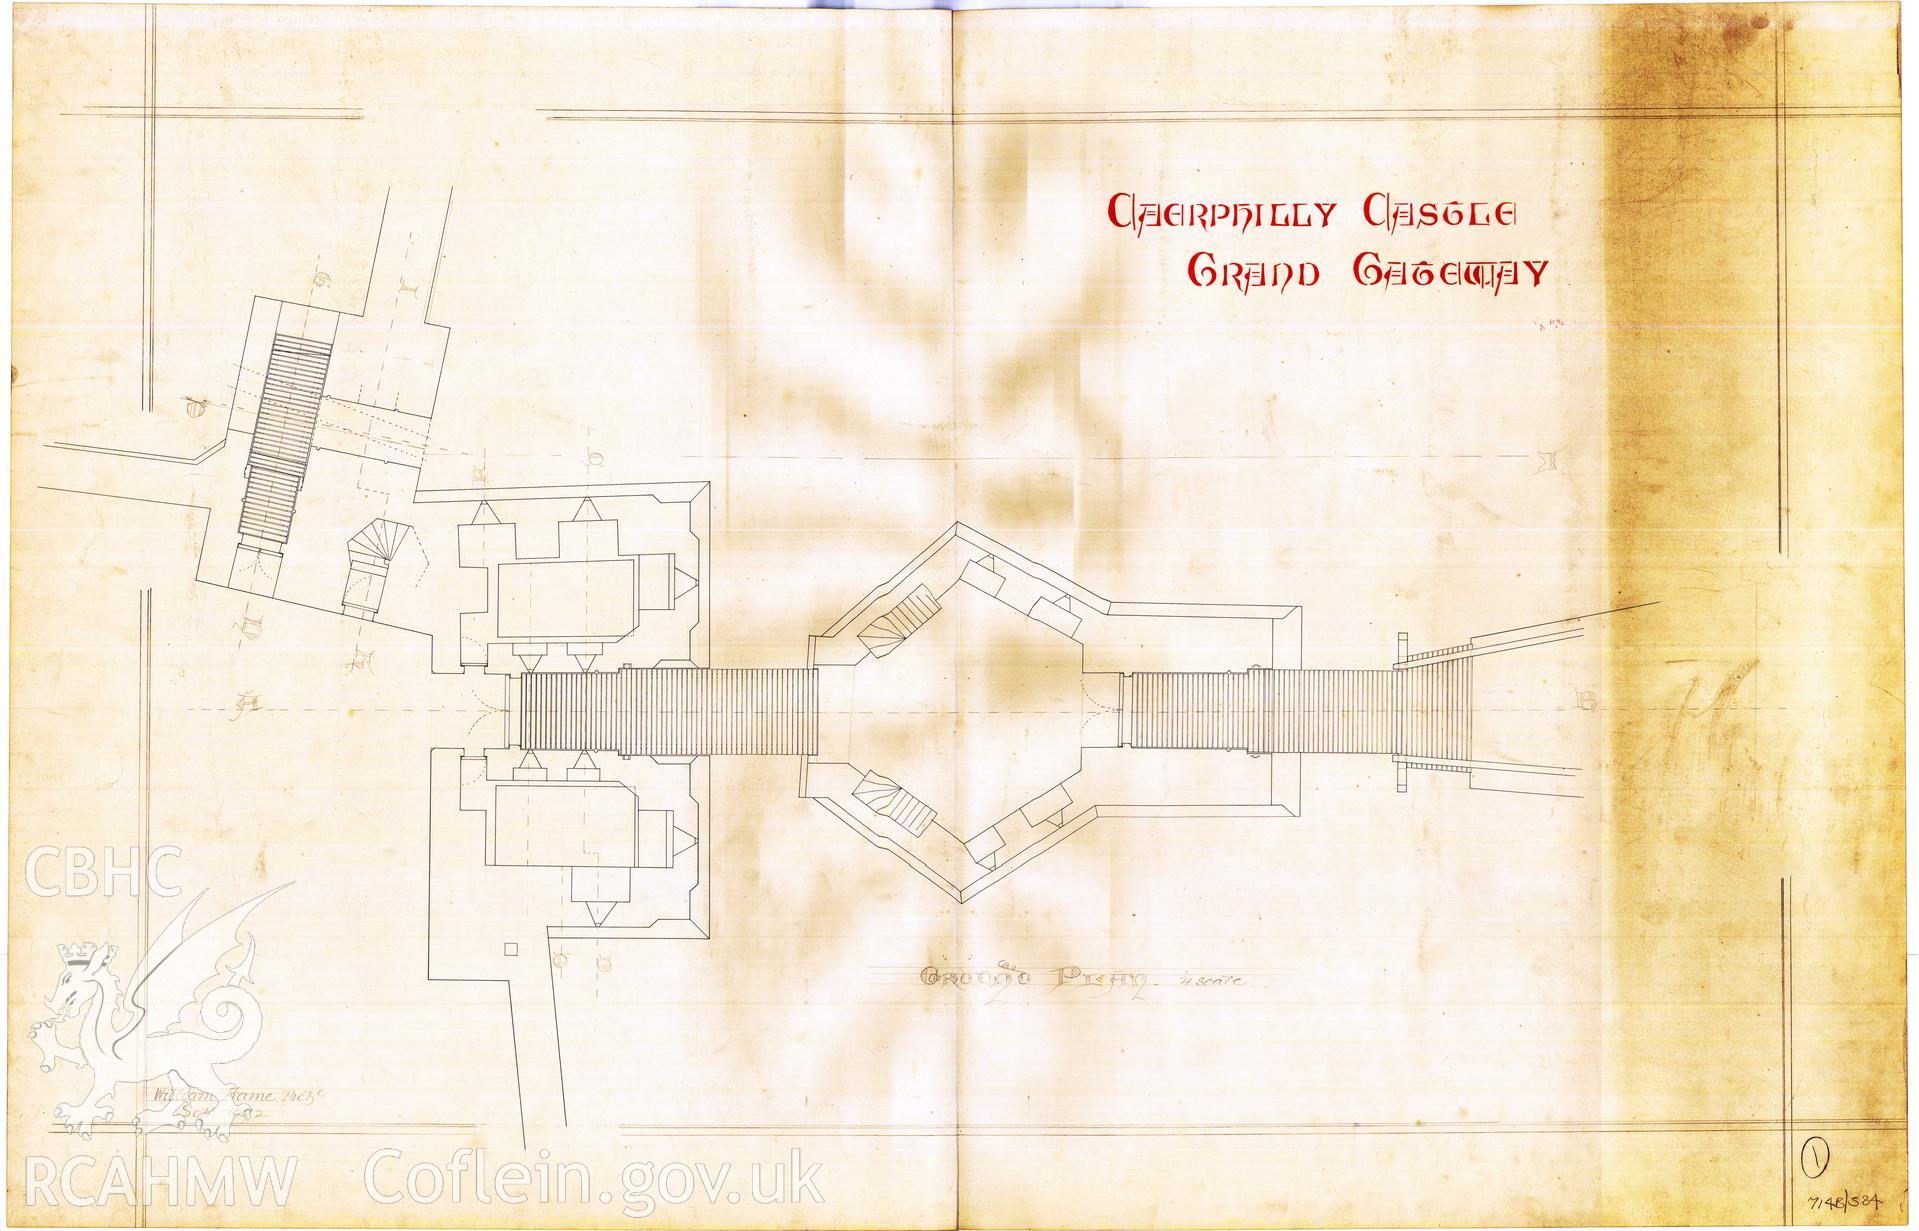 Cadw guardianship monument drawing of Caerphilly Castle. Grand Gateway Ground Plan. Cadw Ref. No:714B/384. Scale 1:96.